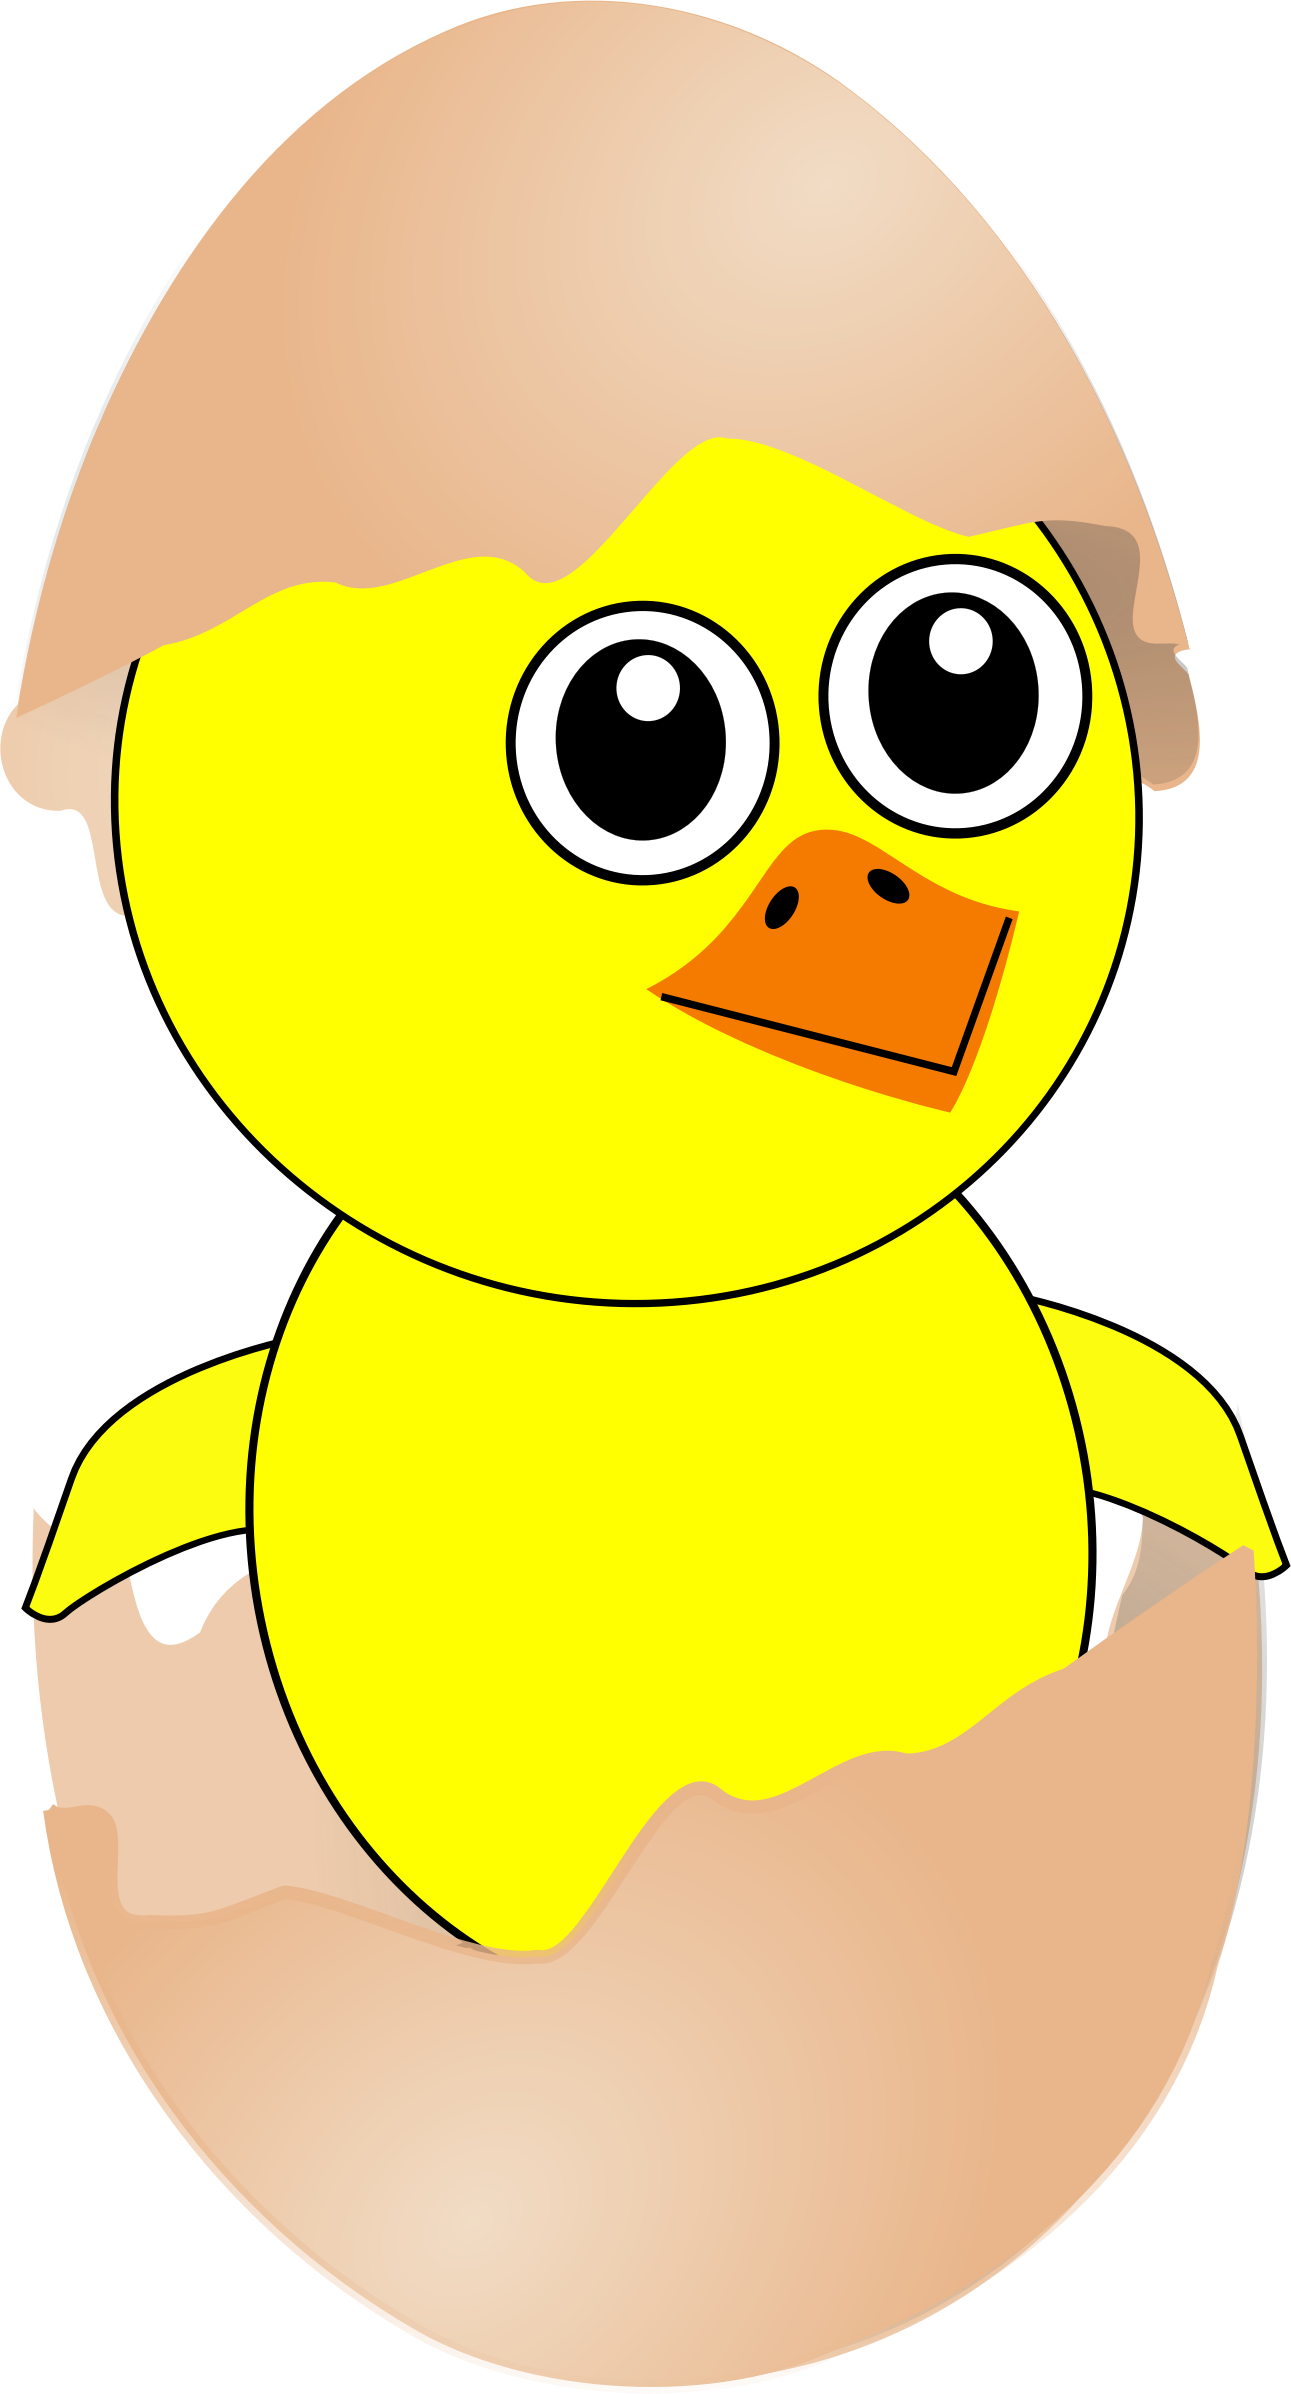 Chick Cartoon PNG File